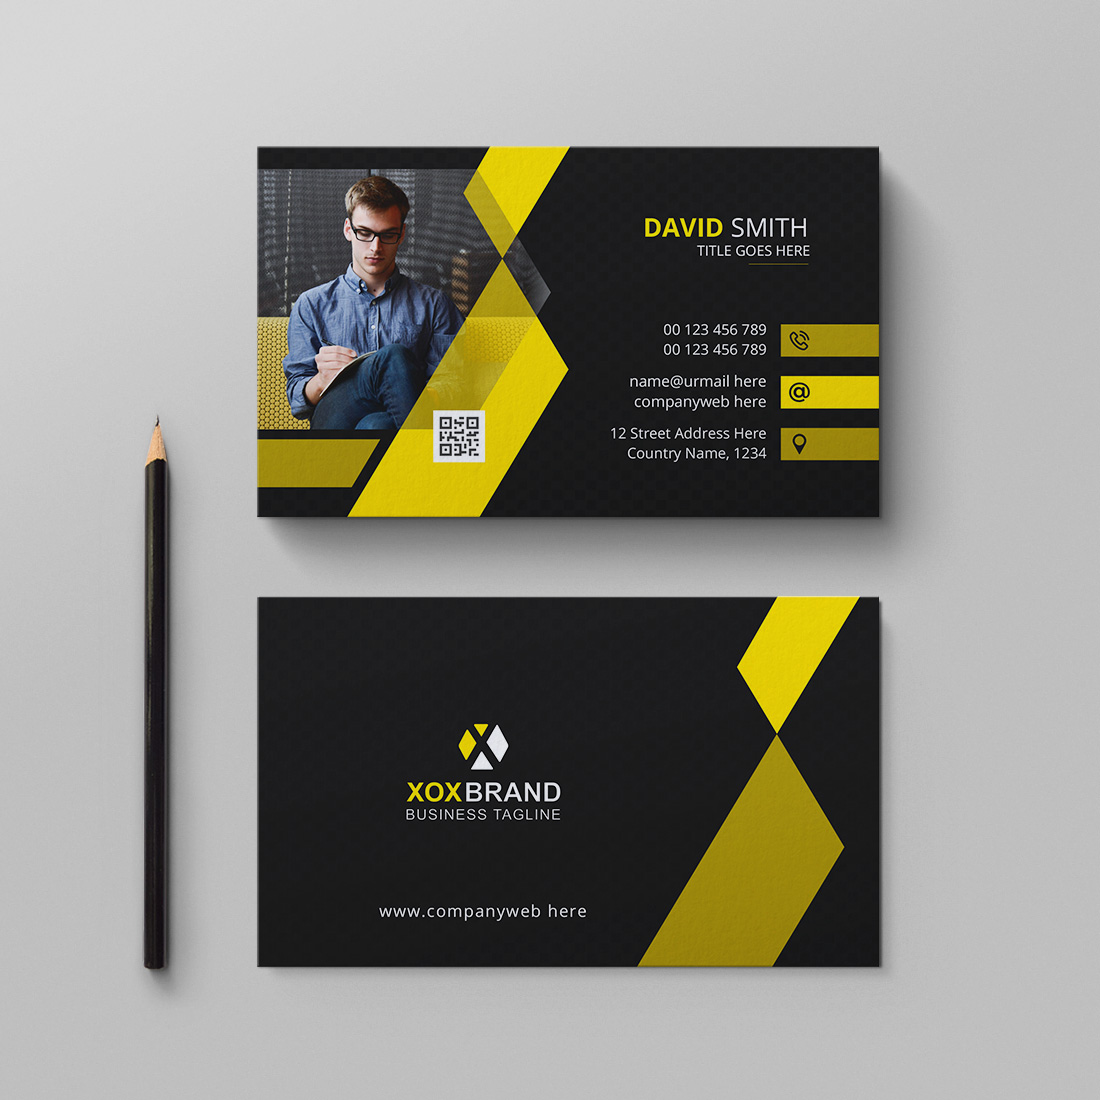 Dark and yellow business card design template cover image.